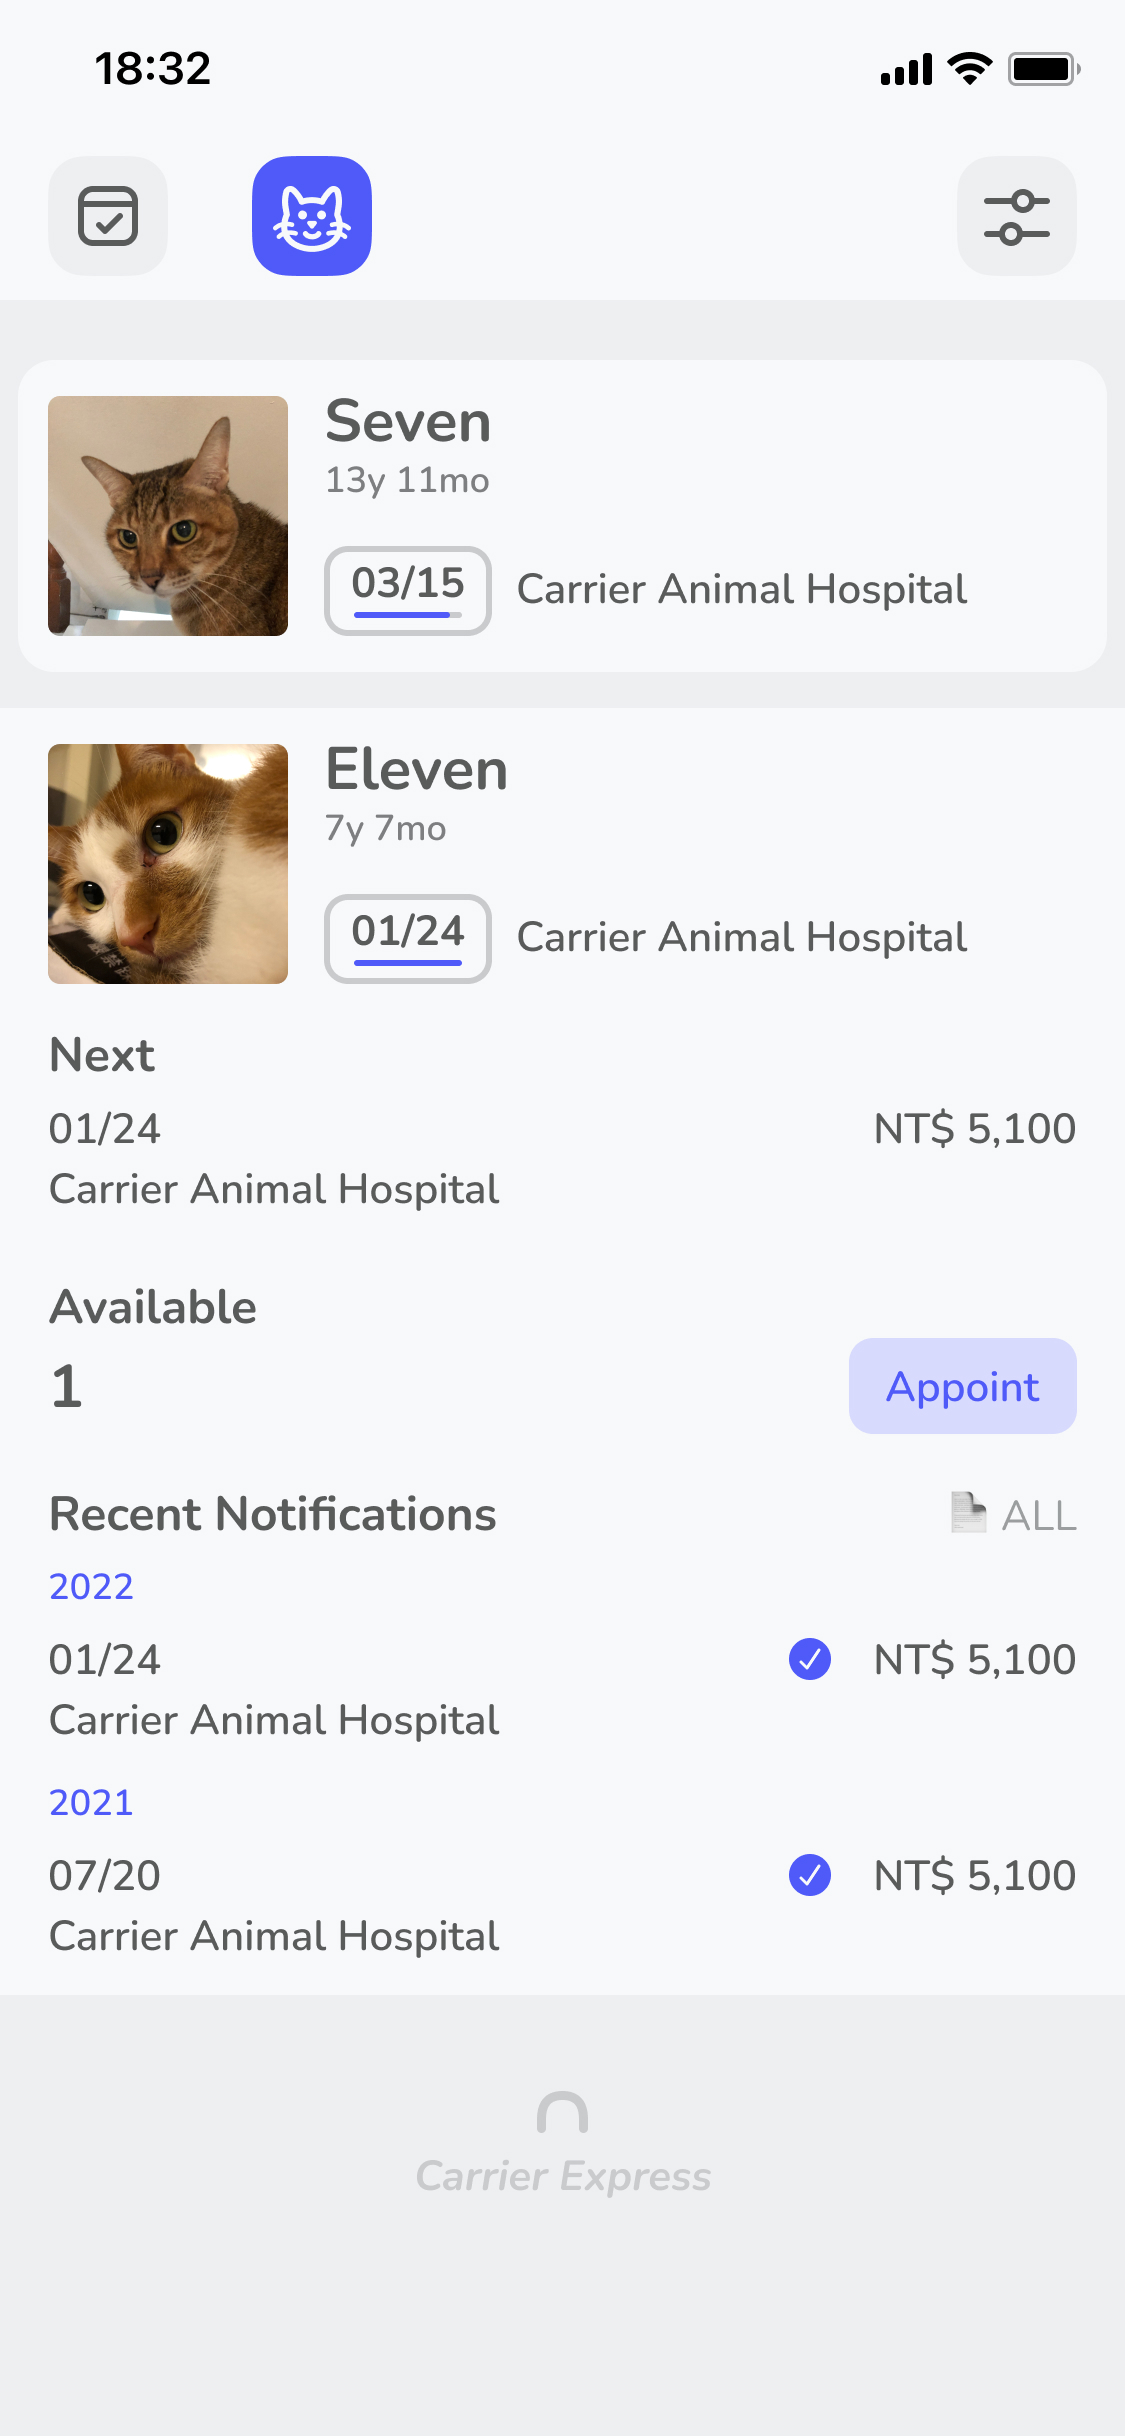 Screenshot: View the details of Seven